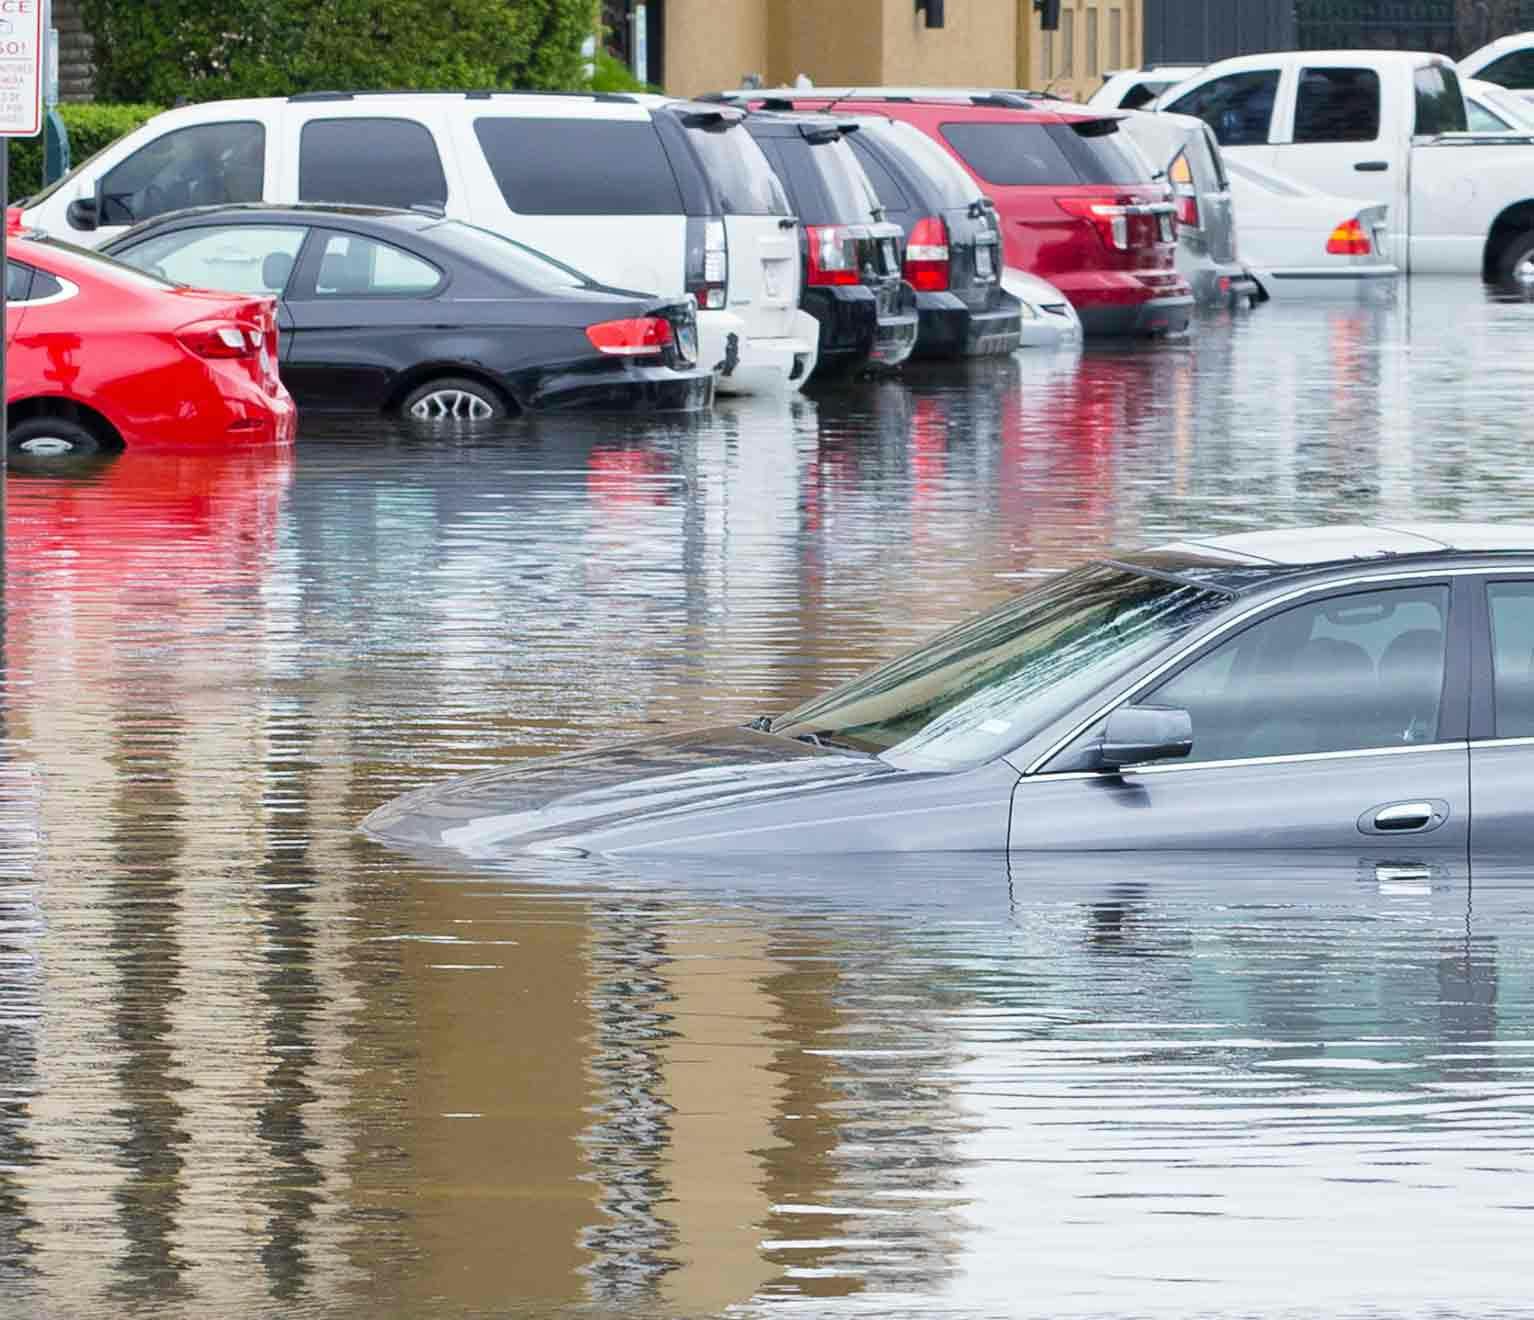 Image of parked cars flooded in a lot.